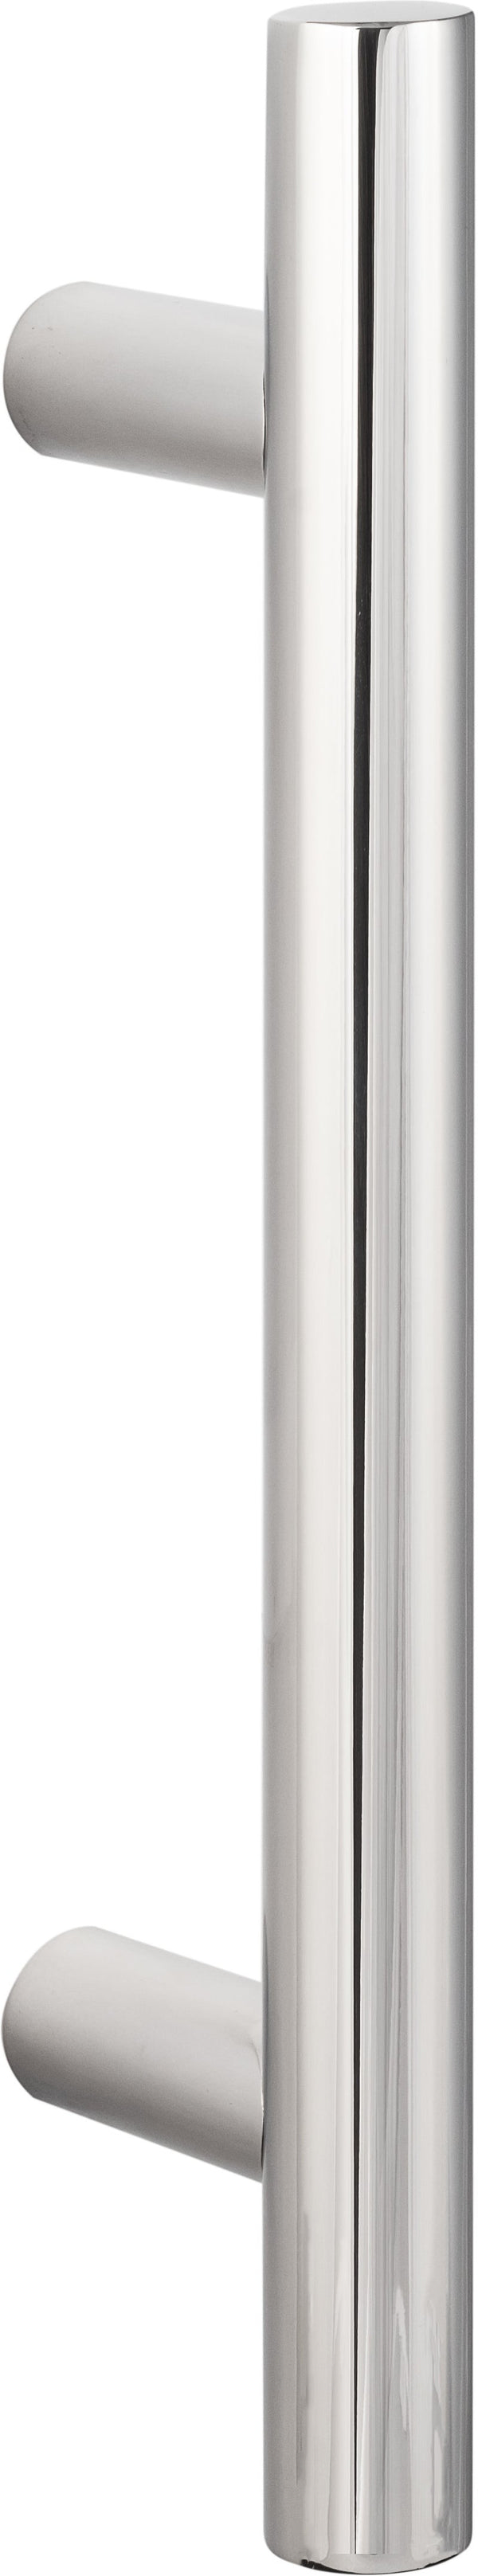 Sure-Loc Barn Door Handle, 12", Ladder, Single Sided in Polished Chrome finish